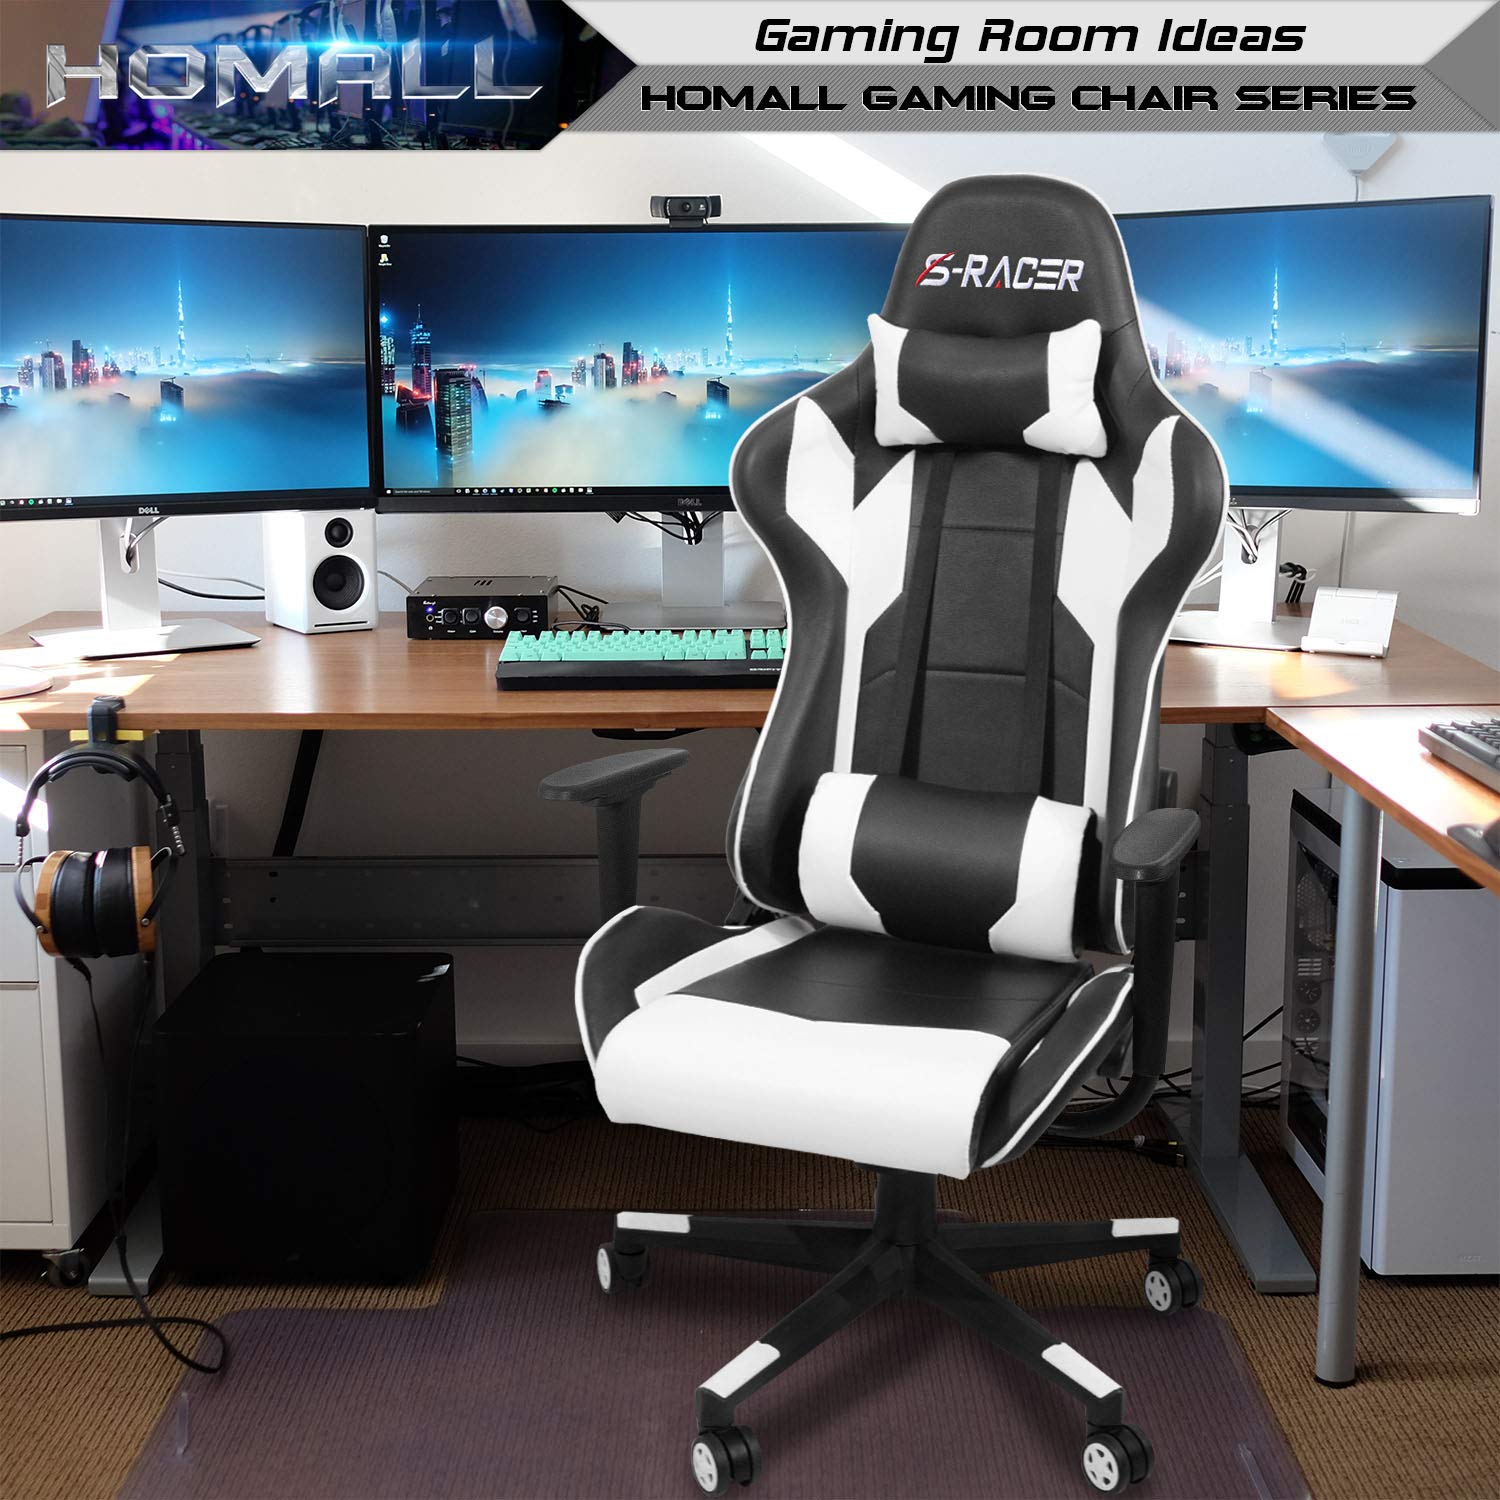 Homall Gaming Chair, Office Chair High Back Computer Chair Leather Desk Chair Racing Executive Ergonomic Adjustable Swivel Task Chair with Headrest and Lumbar Support (White)